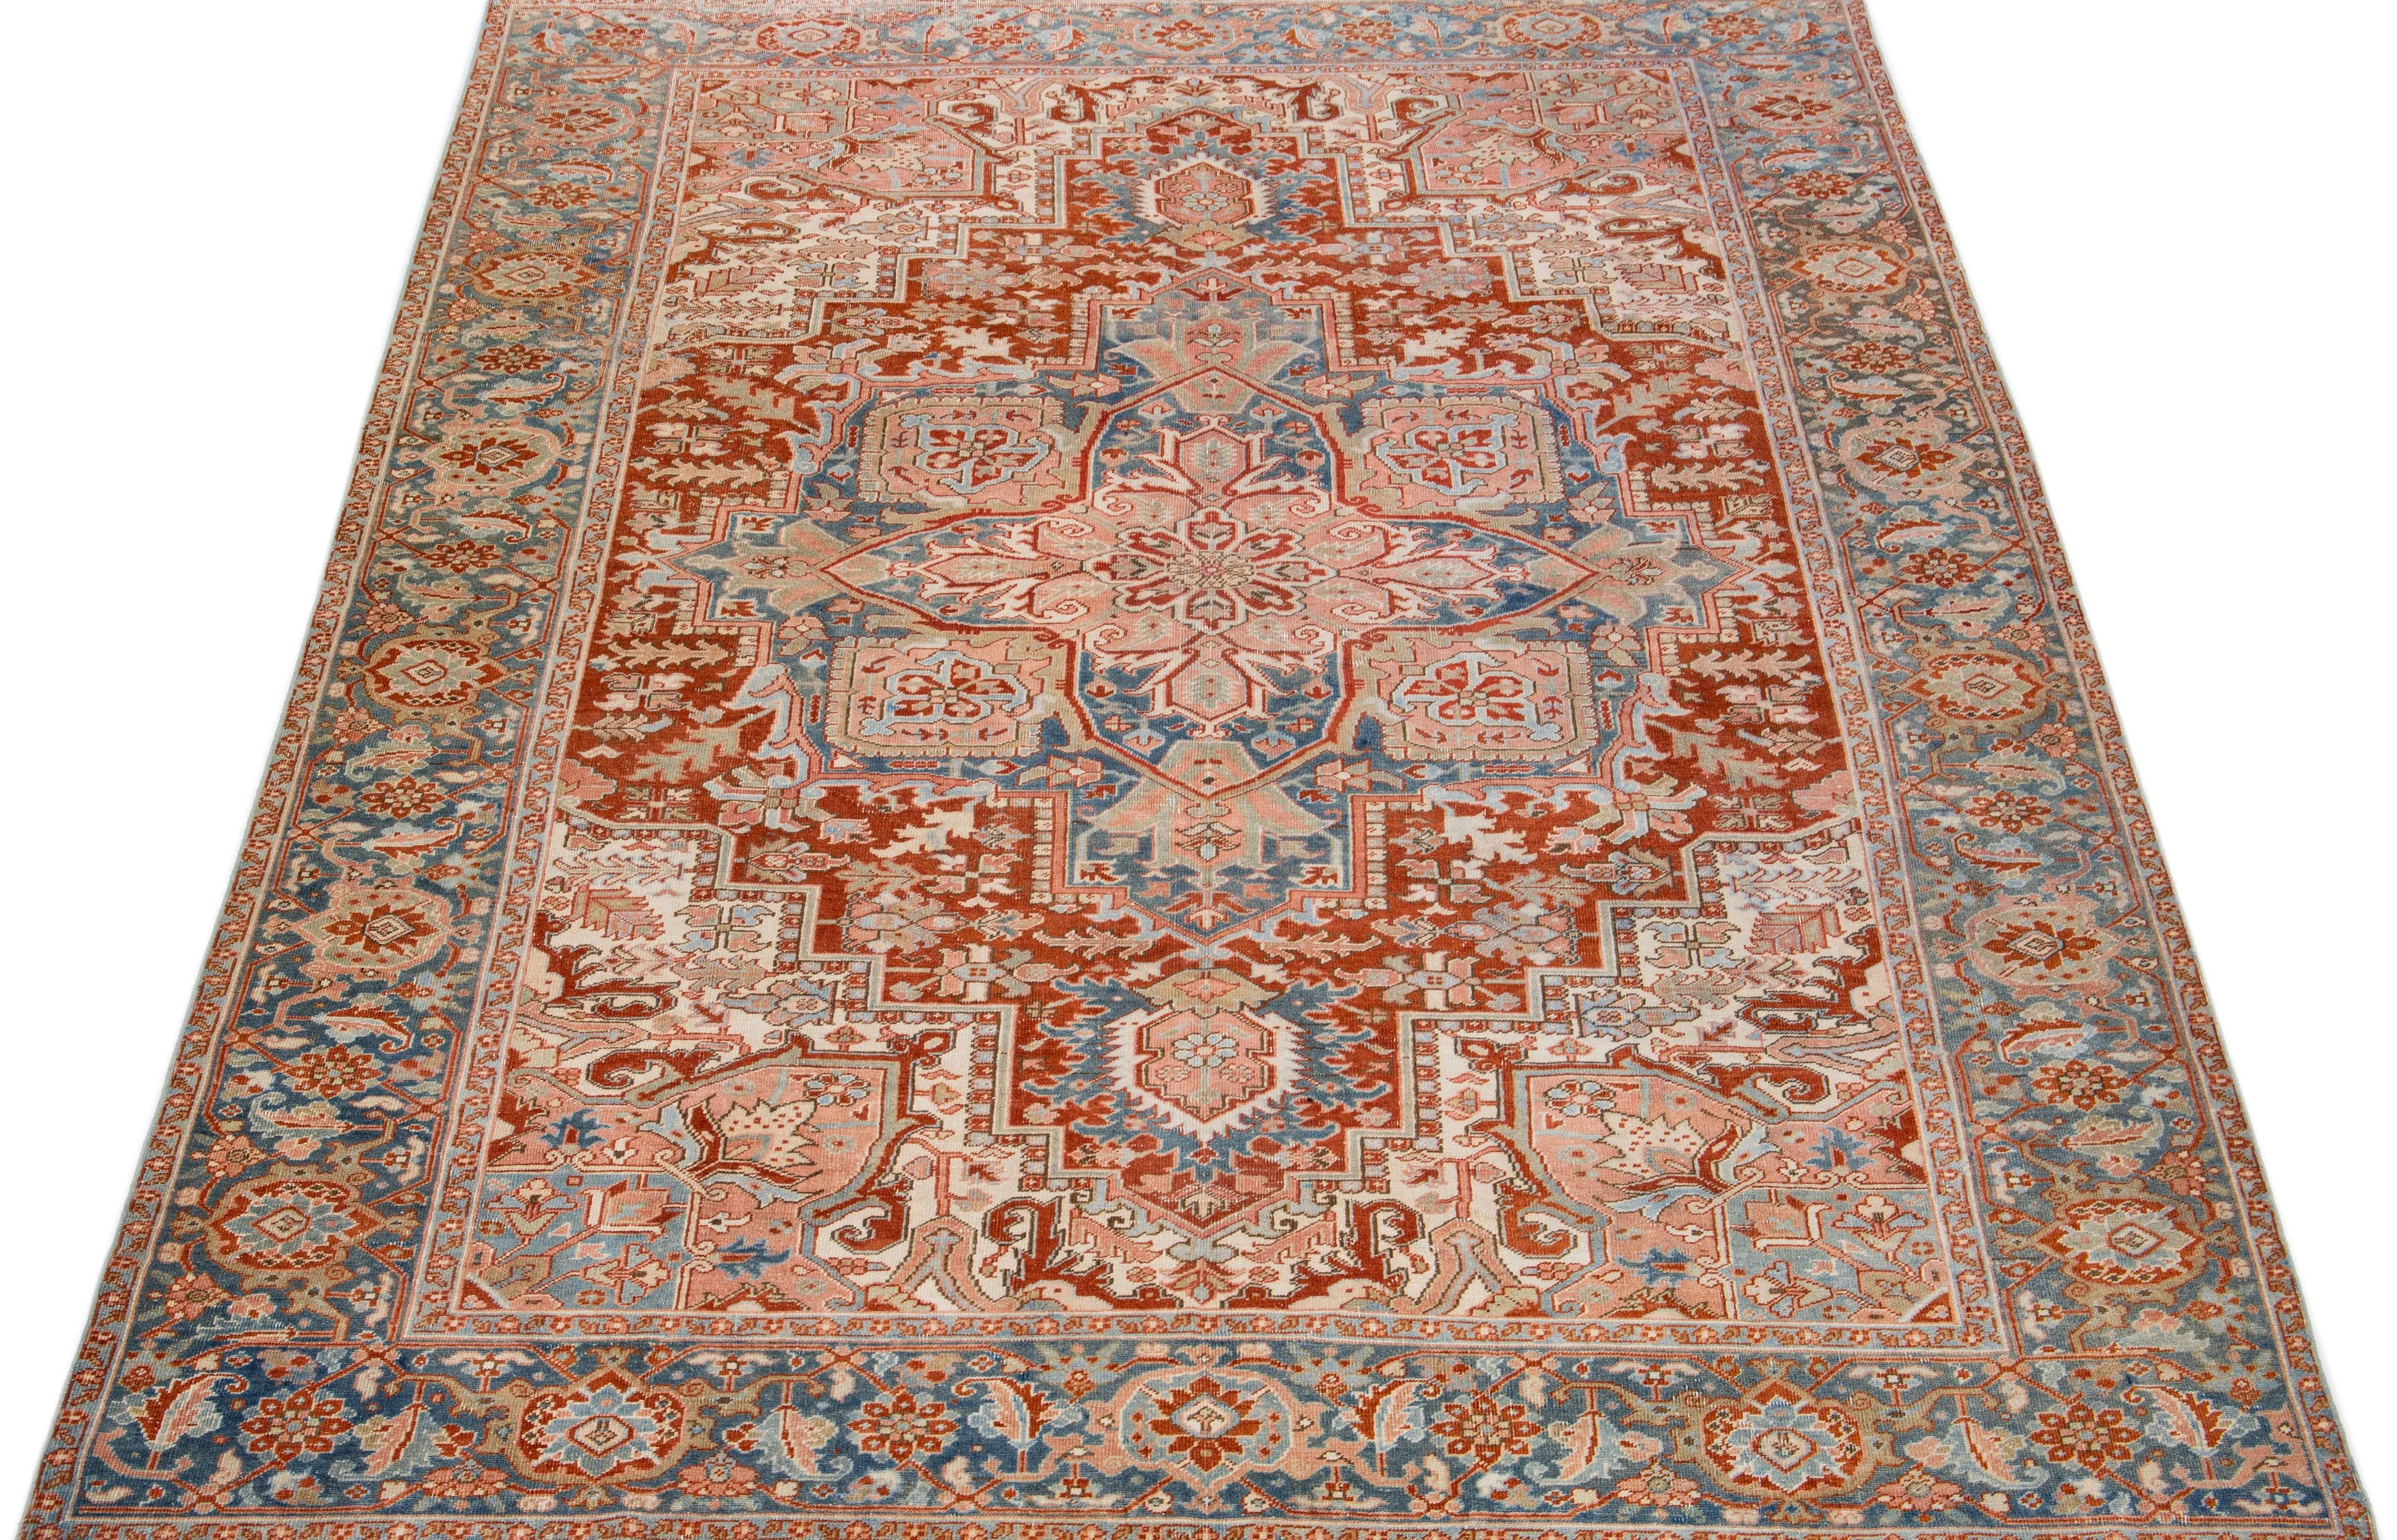 Beautiful antique Heriz hand-knotted wool rug with a beige color field. This Persian rug has a blue frame and pink accents in a gorgeous all-over geometric floral design.

This rug measures: 8'3